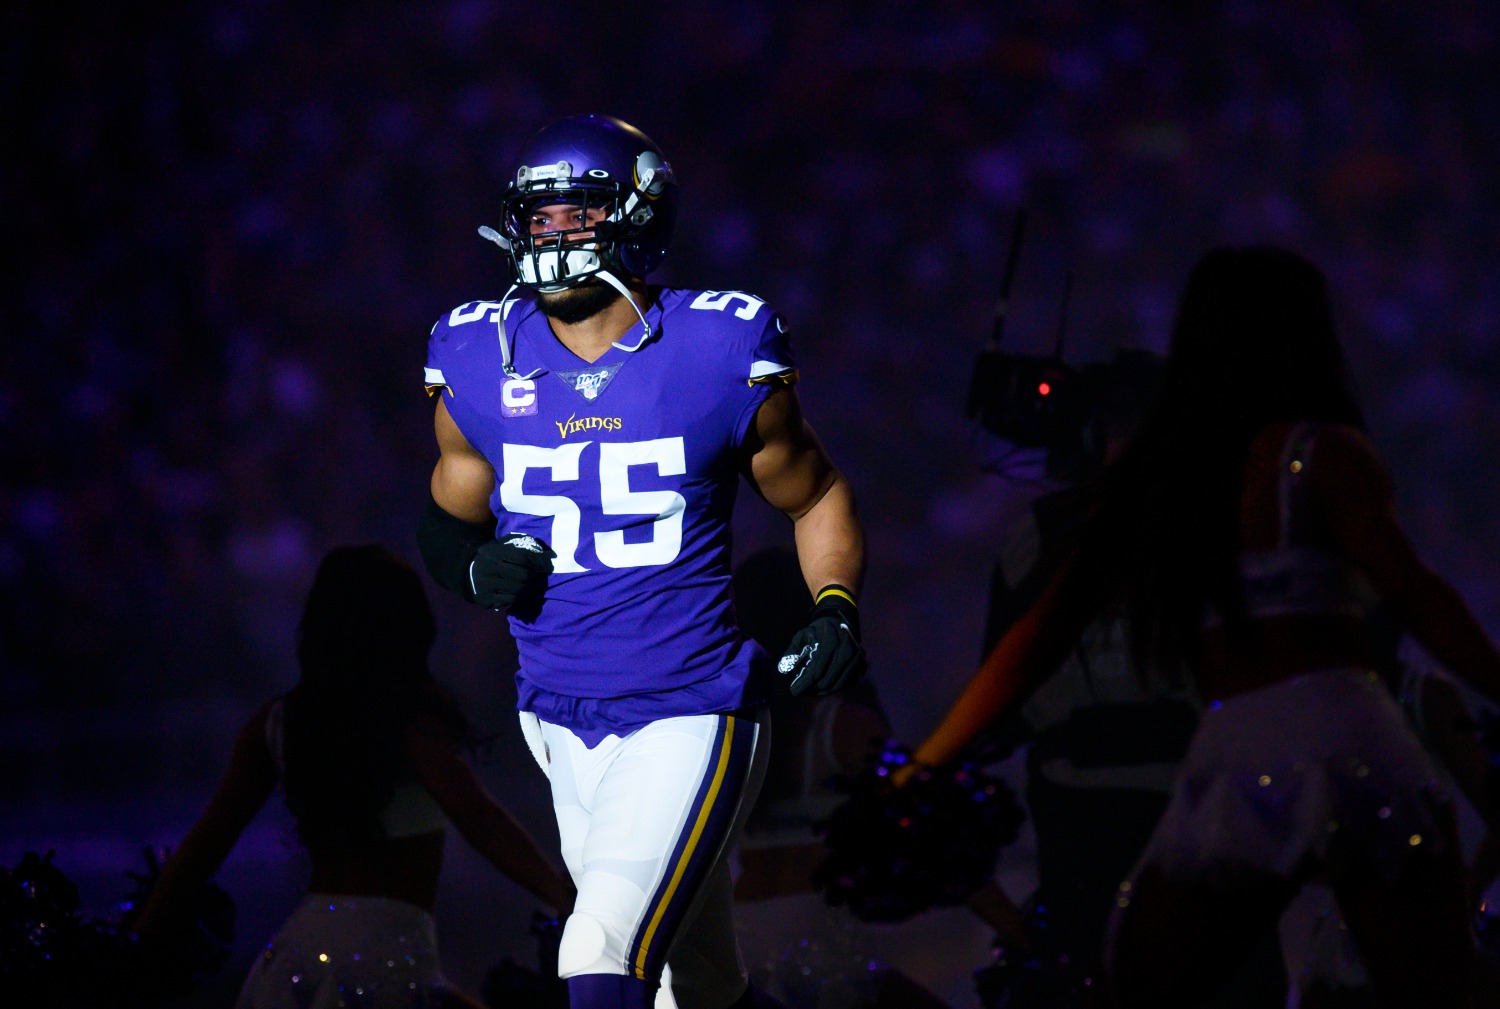 Highly-paid linebacker Anthony Barr suffered a season-ending injury on Sunday that will force a Vikings rookie to step up in his absence.